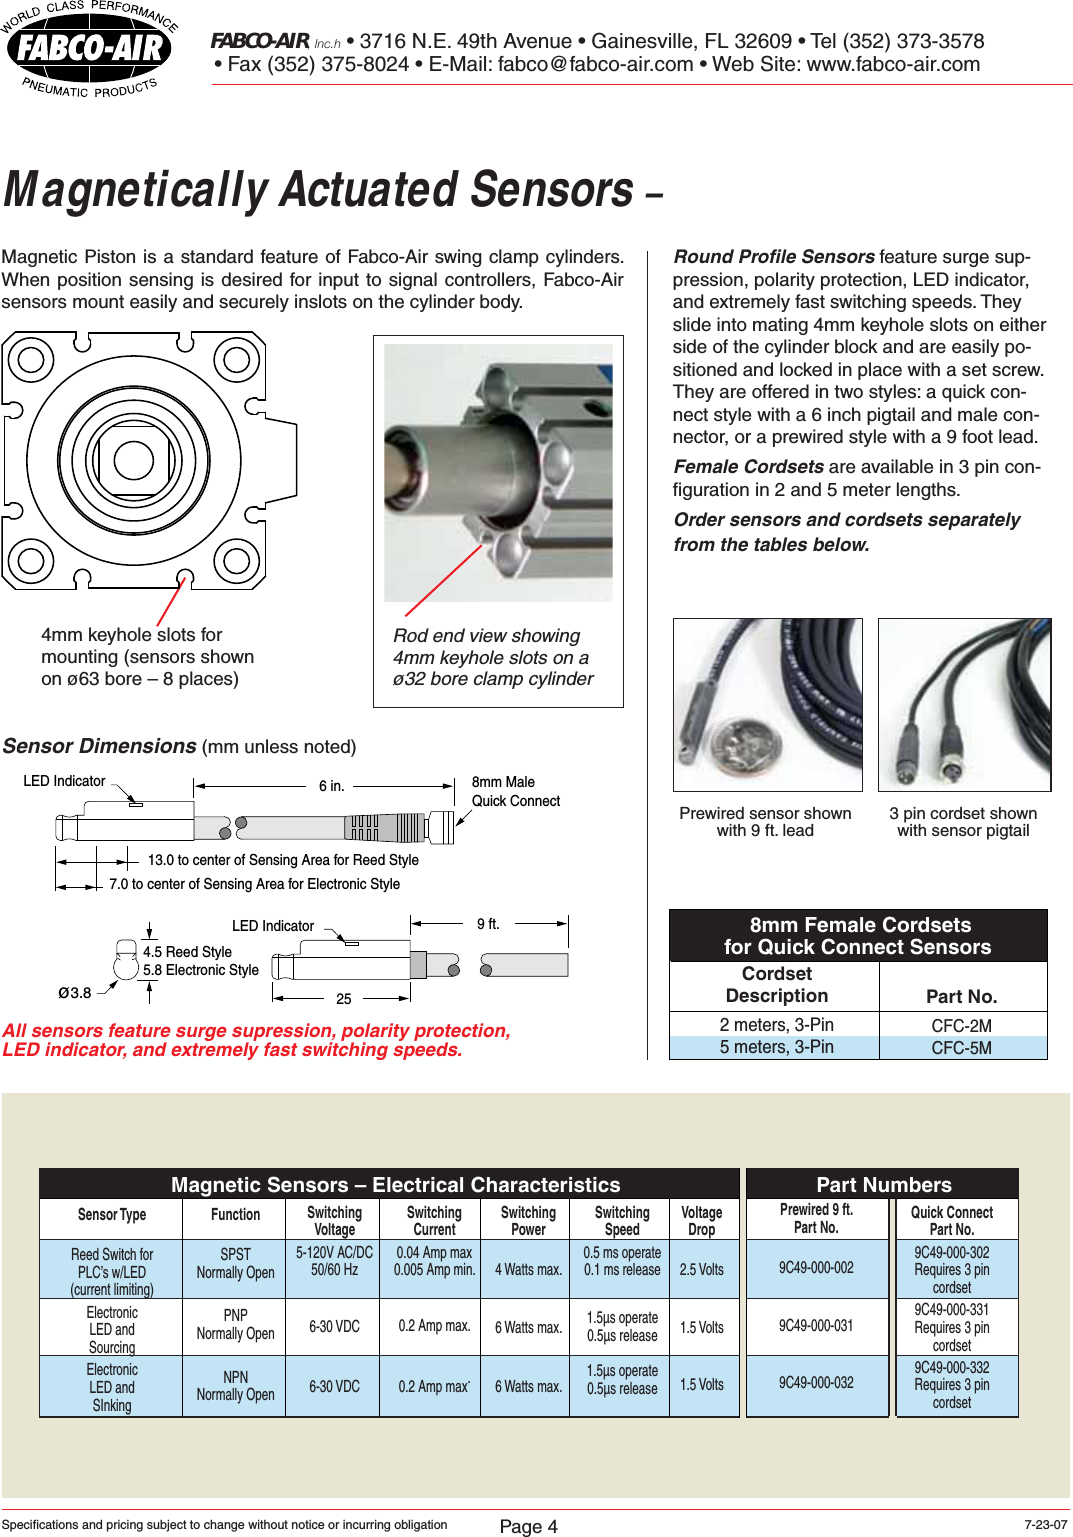 Page 4 of 4 - Flow Fabco-Air Sc Series Clamp Cylinders-1505484123 User Manual